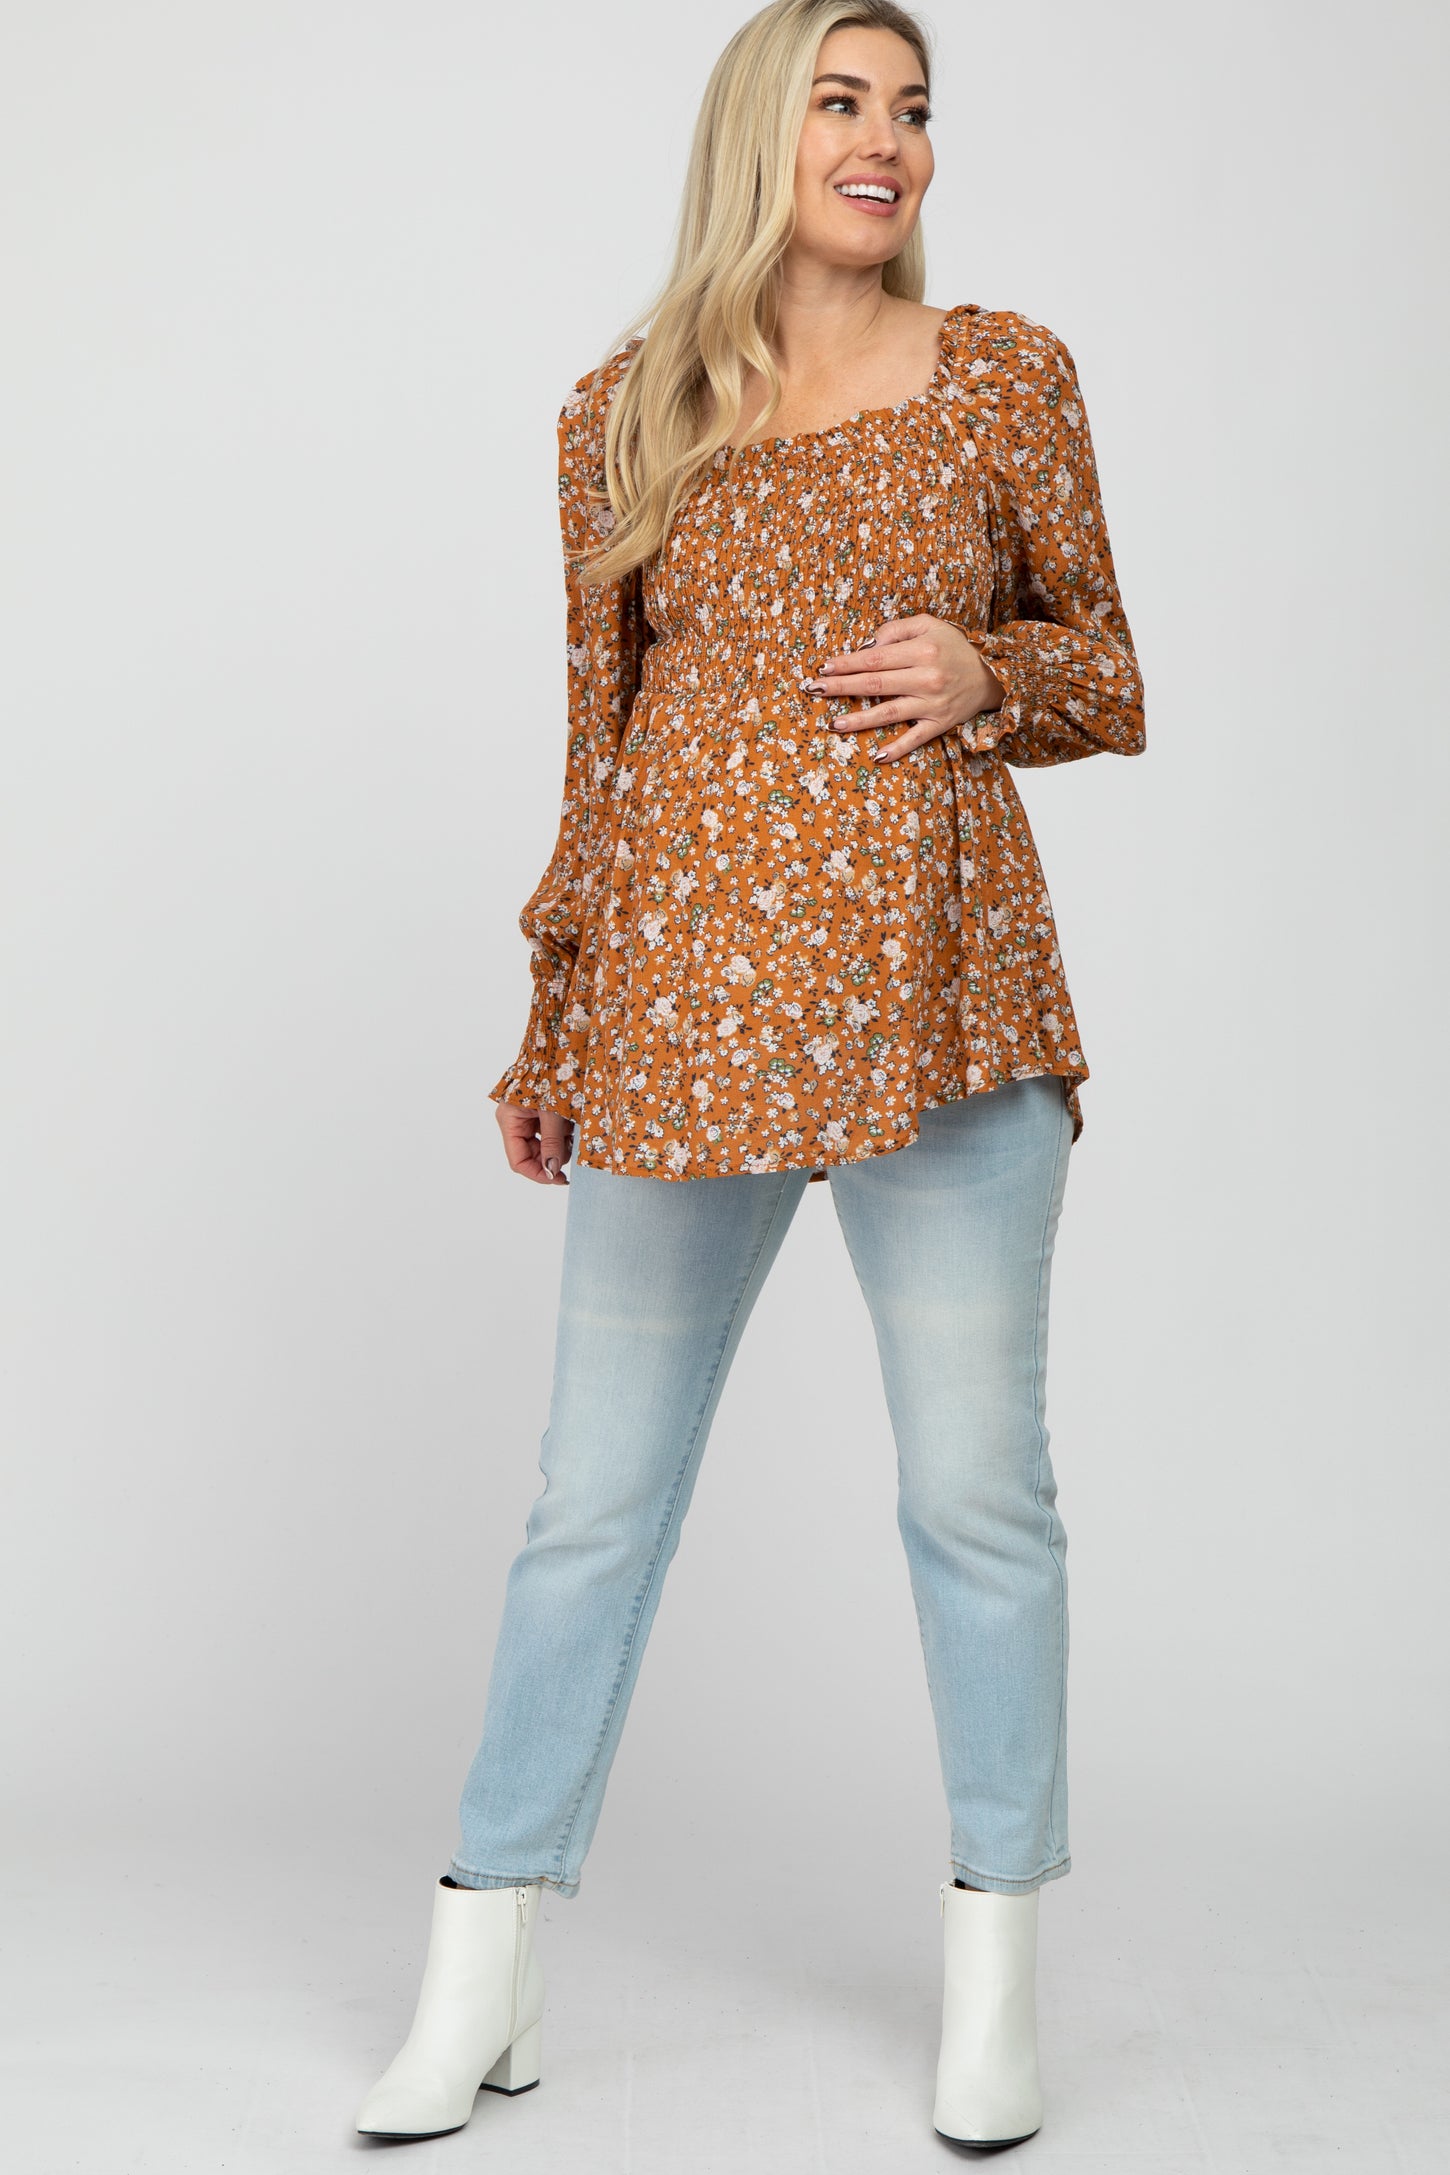 Camel Floral Smocked Bubble Sleeve Maternity Blouse